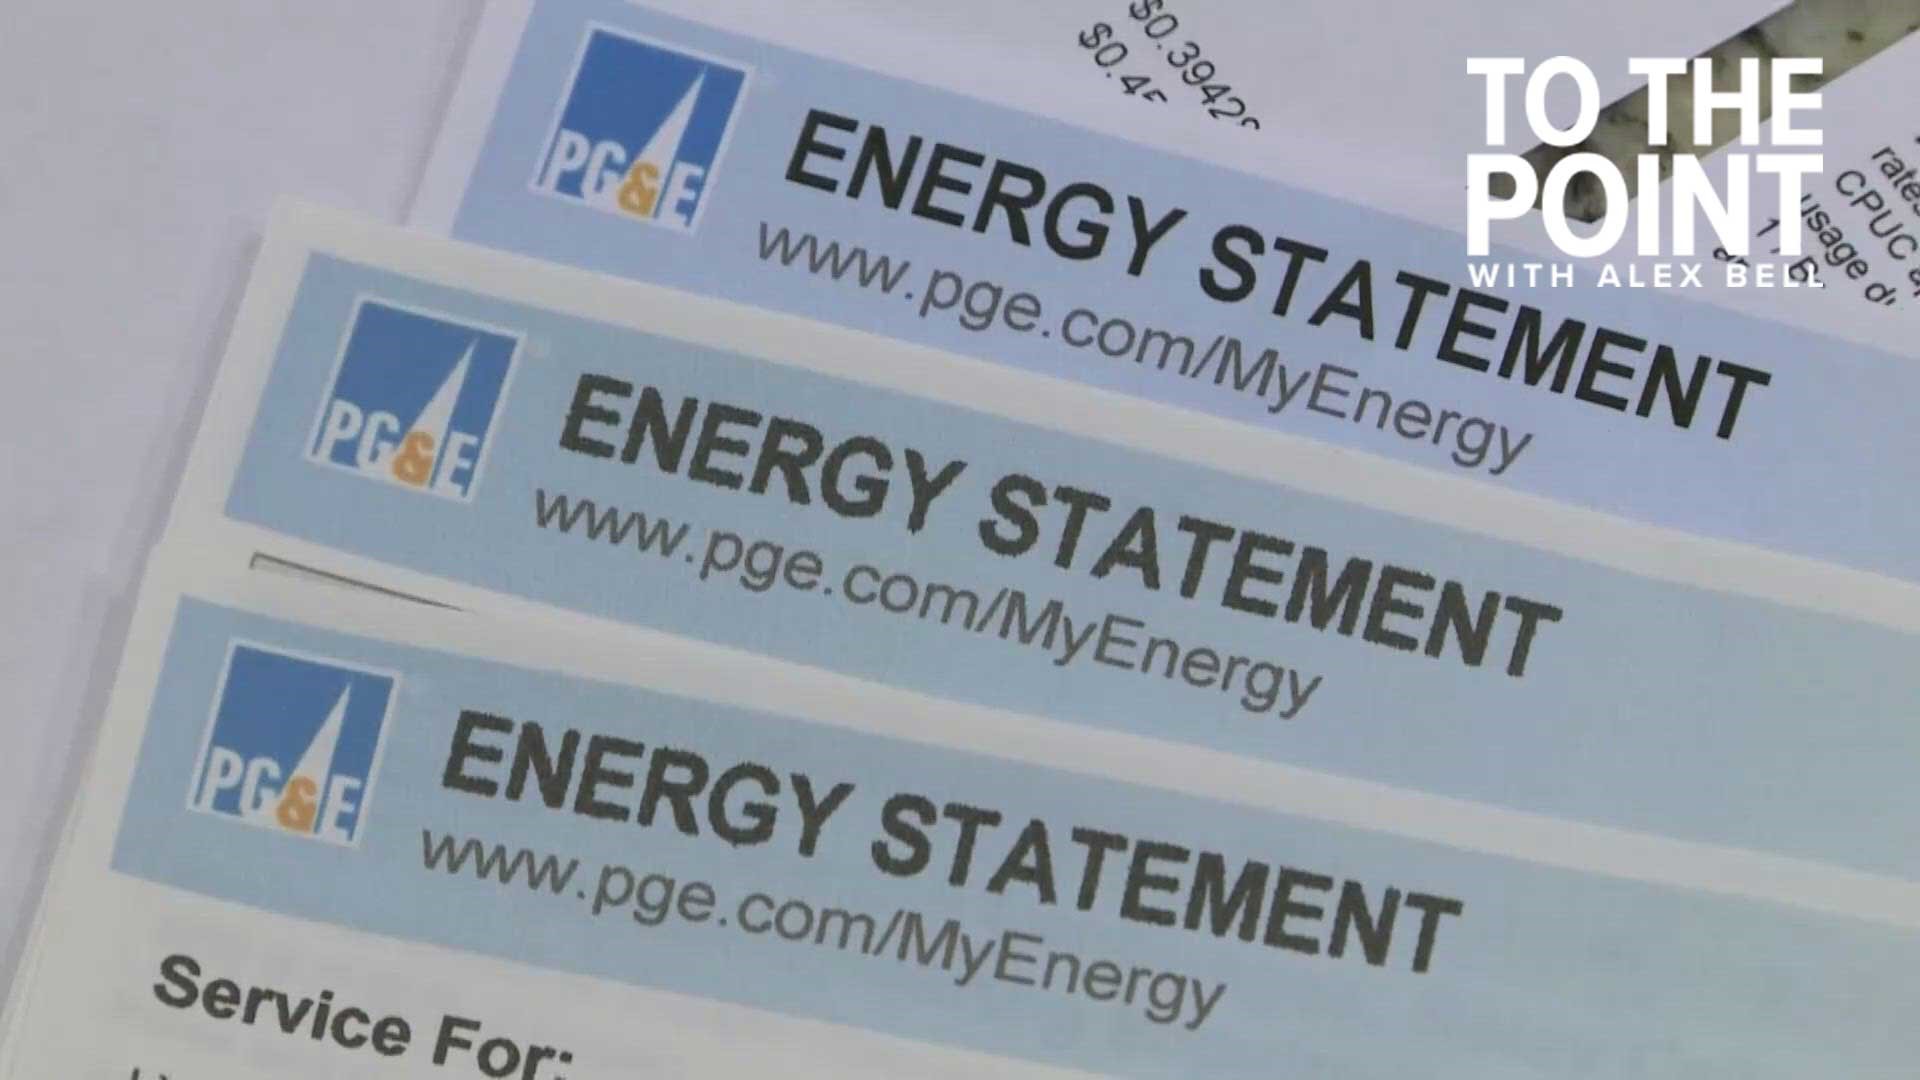 California Public Utilities Commission approves PG&E rate hike | What we know